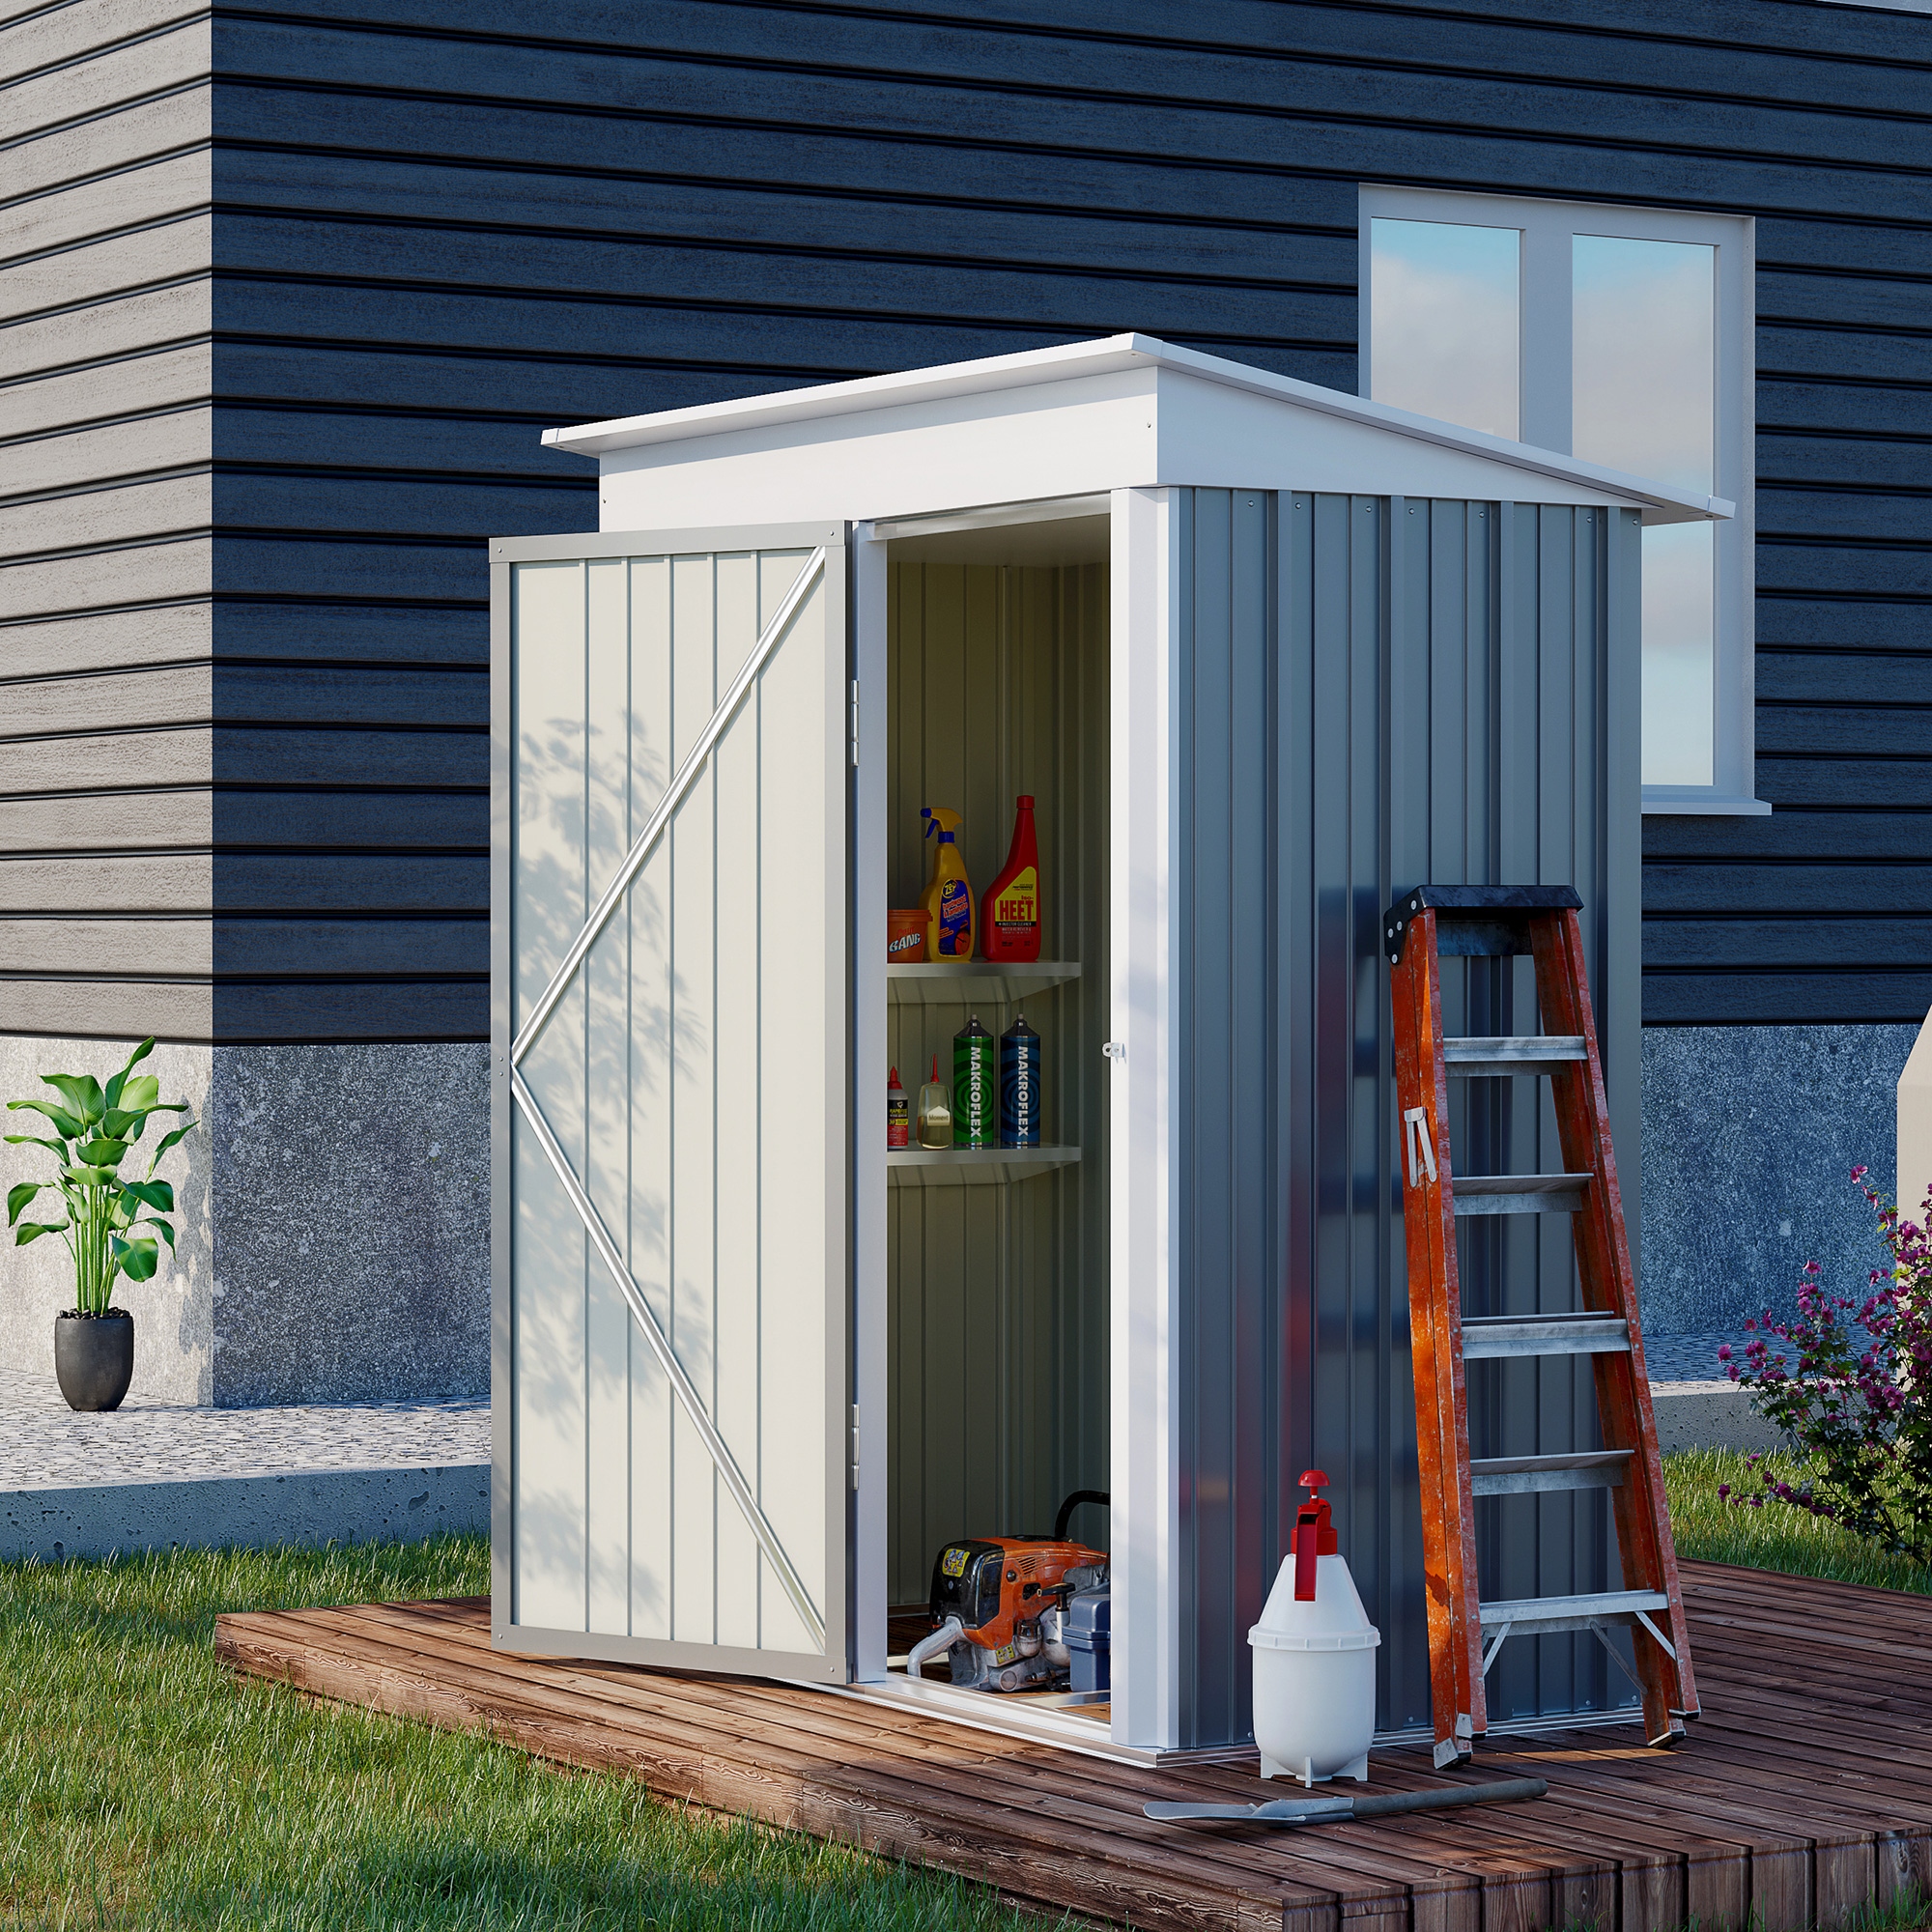 Image of Small tool shed with lean-to roof